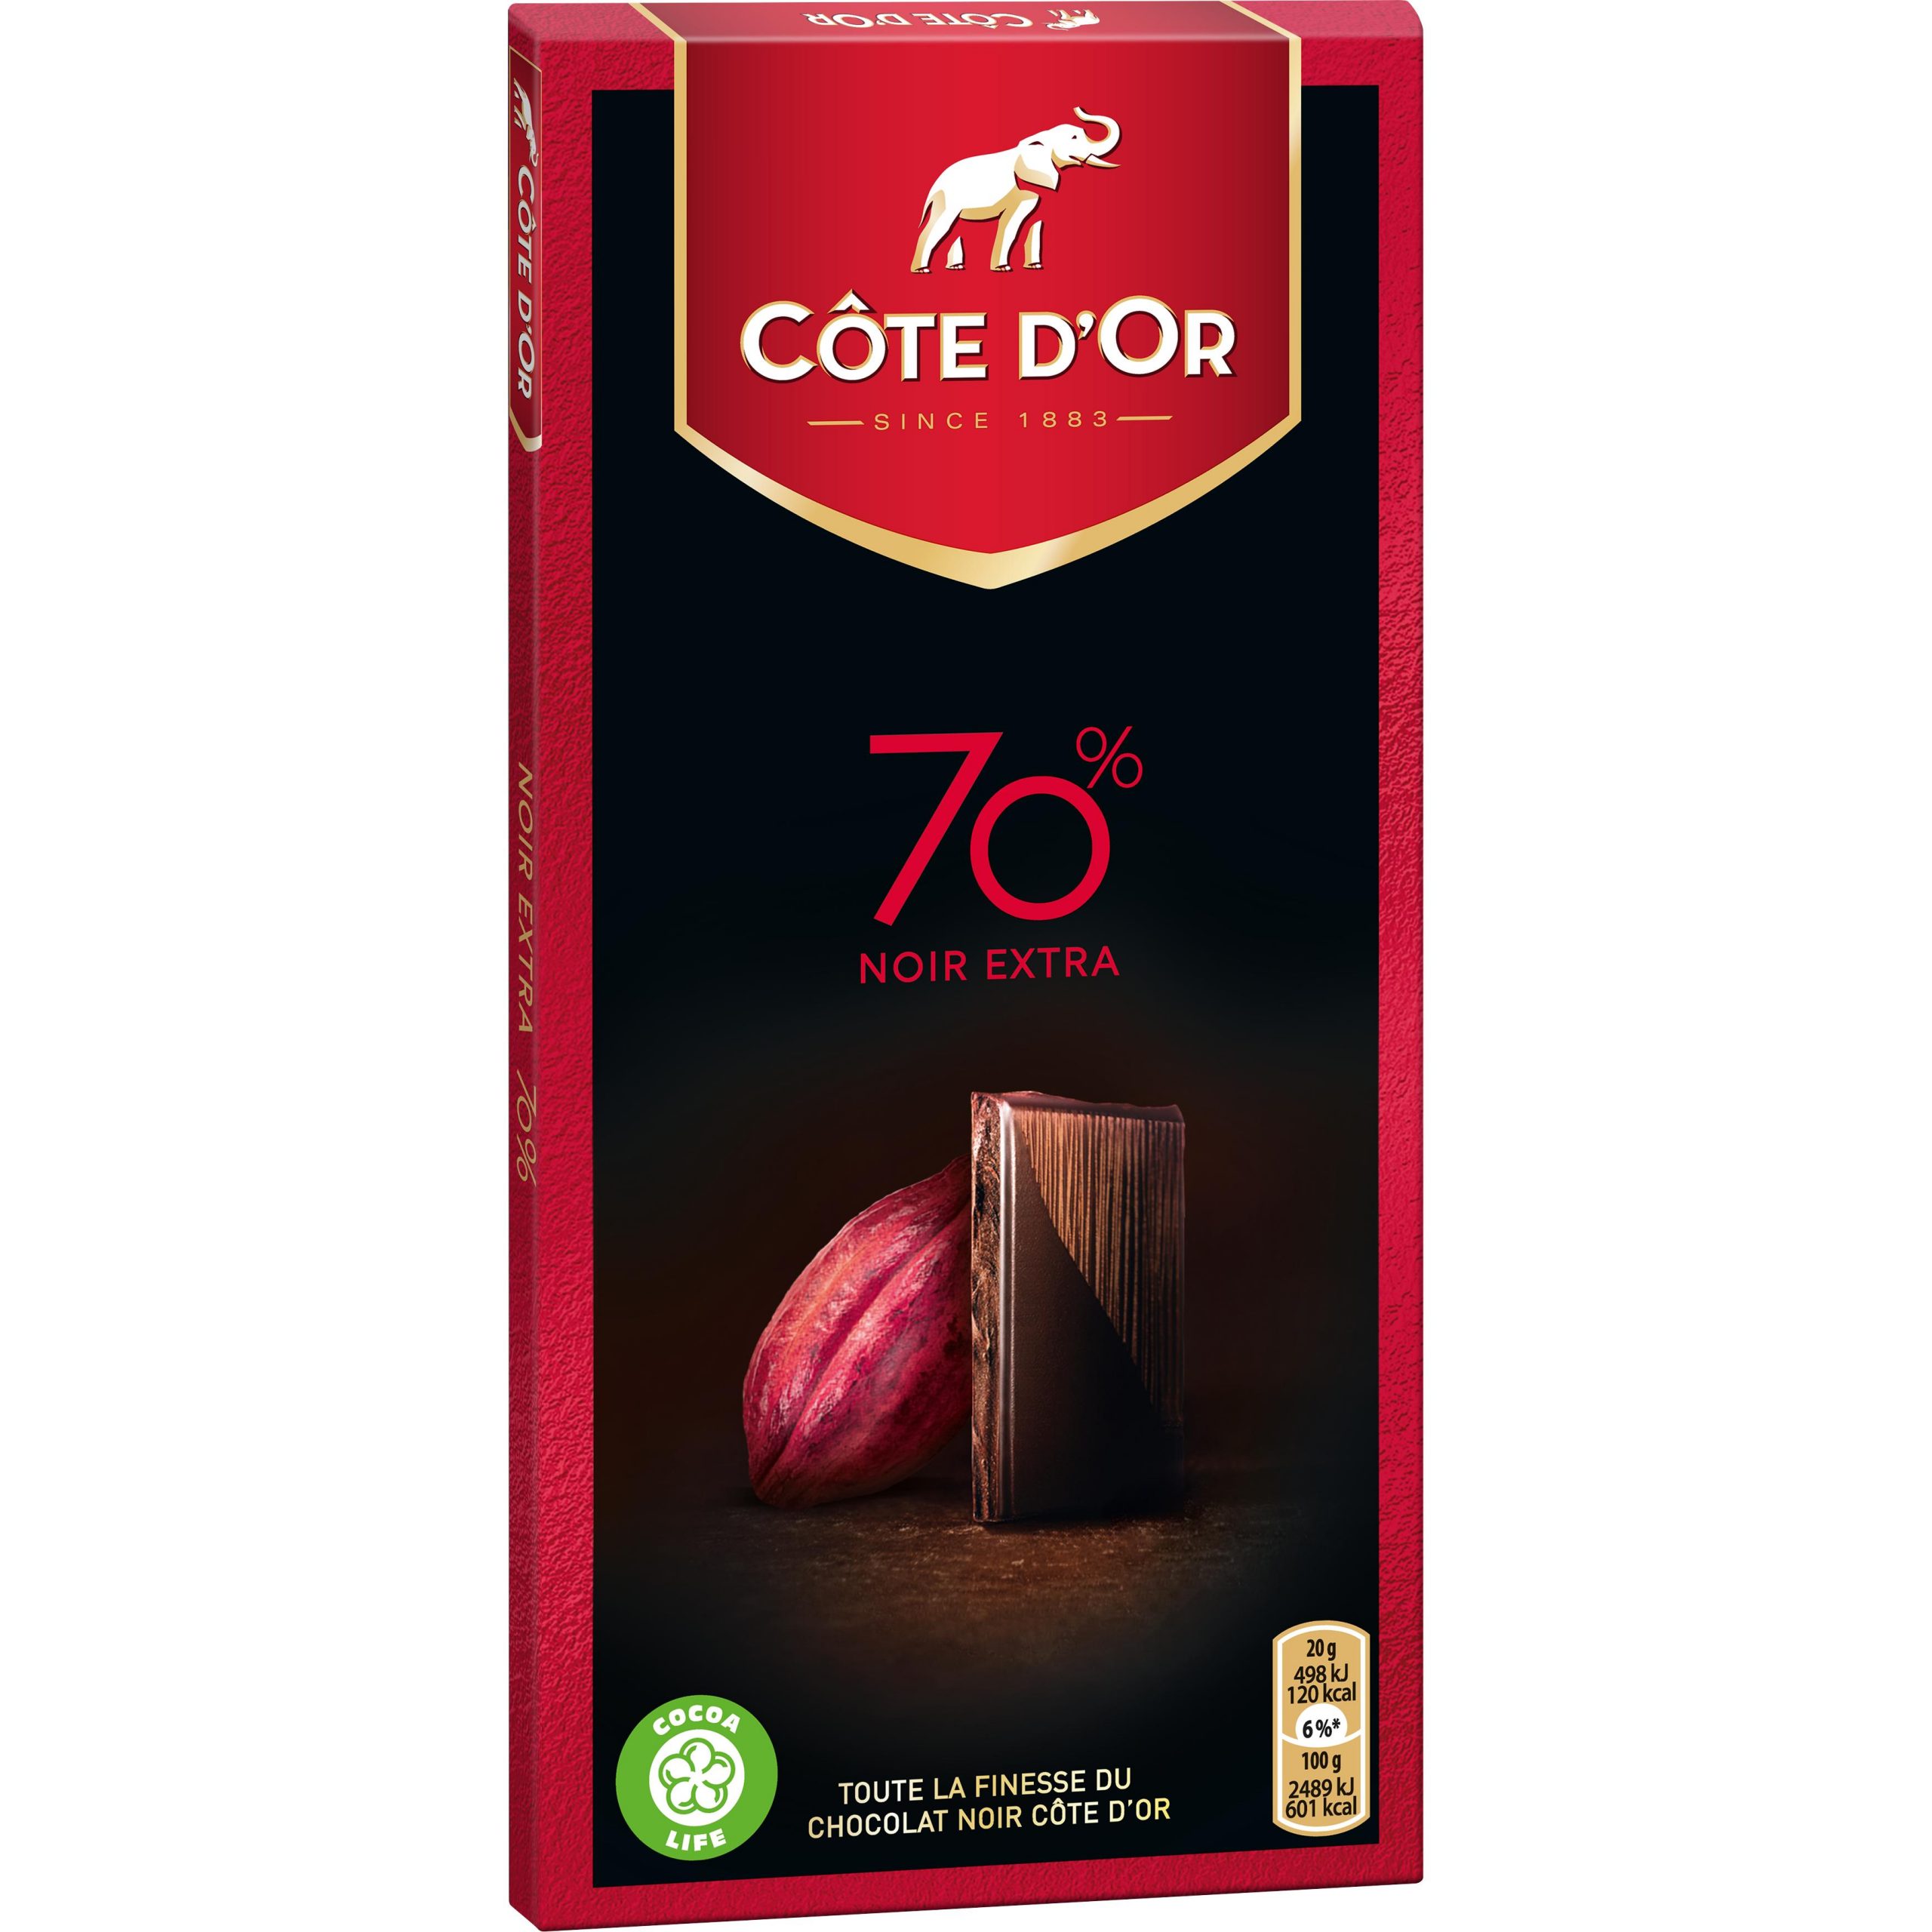 Côte d'or Chocolate